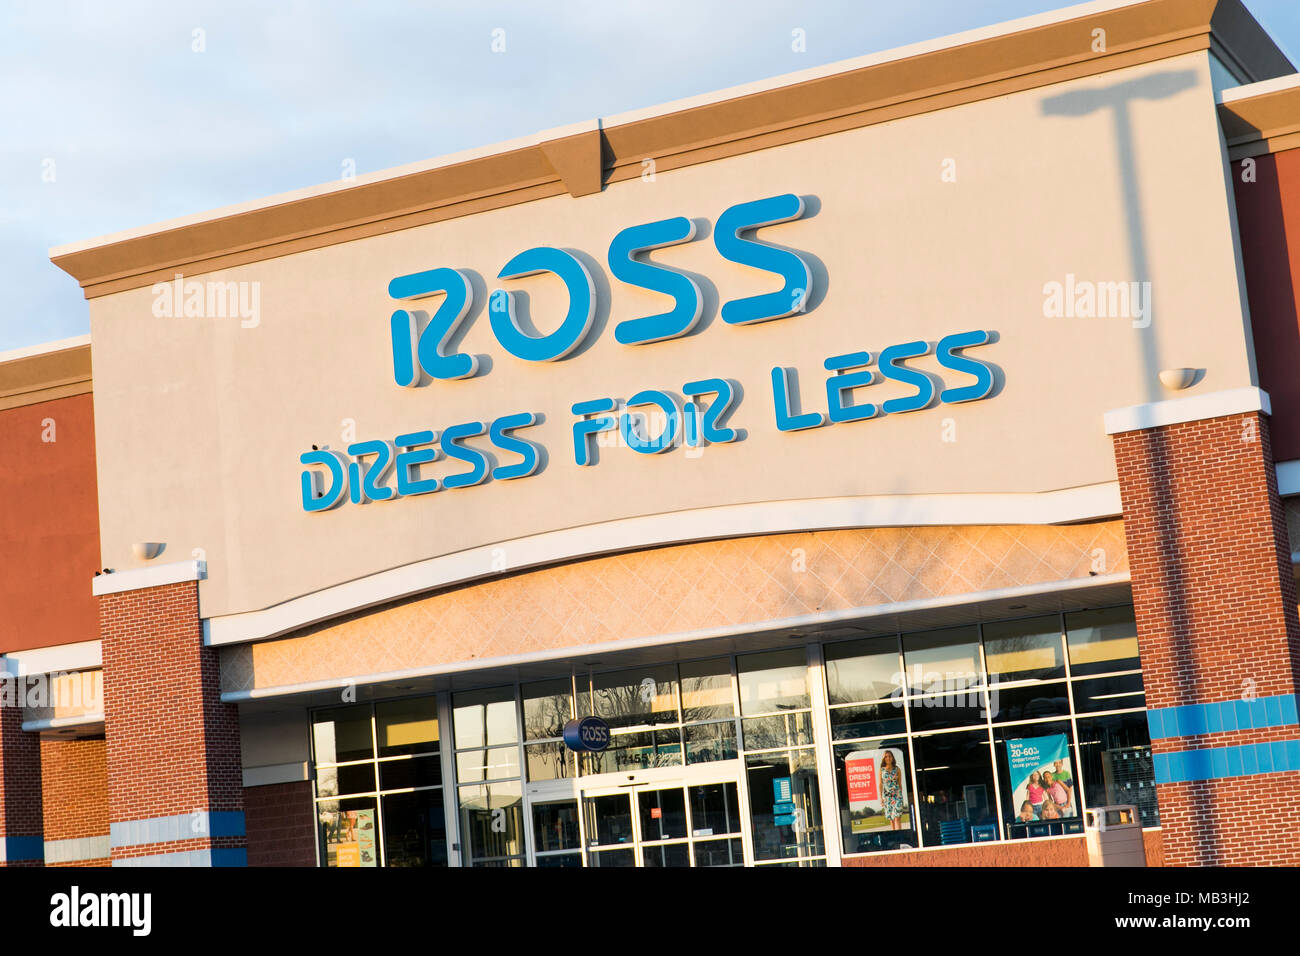 Bonggamom Finds: San Francisco's Ross -- Dress for Less, Better than Ever